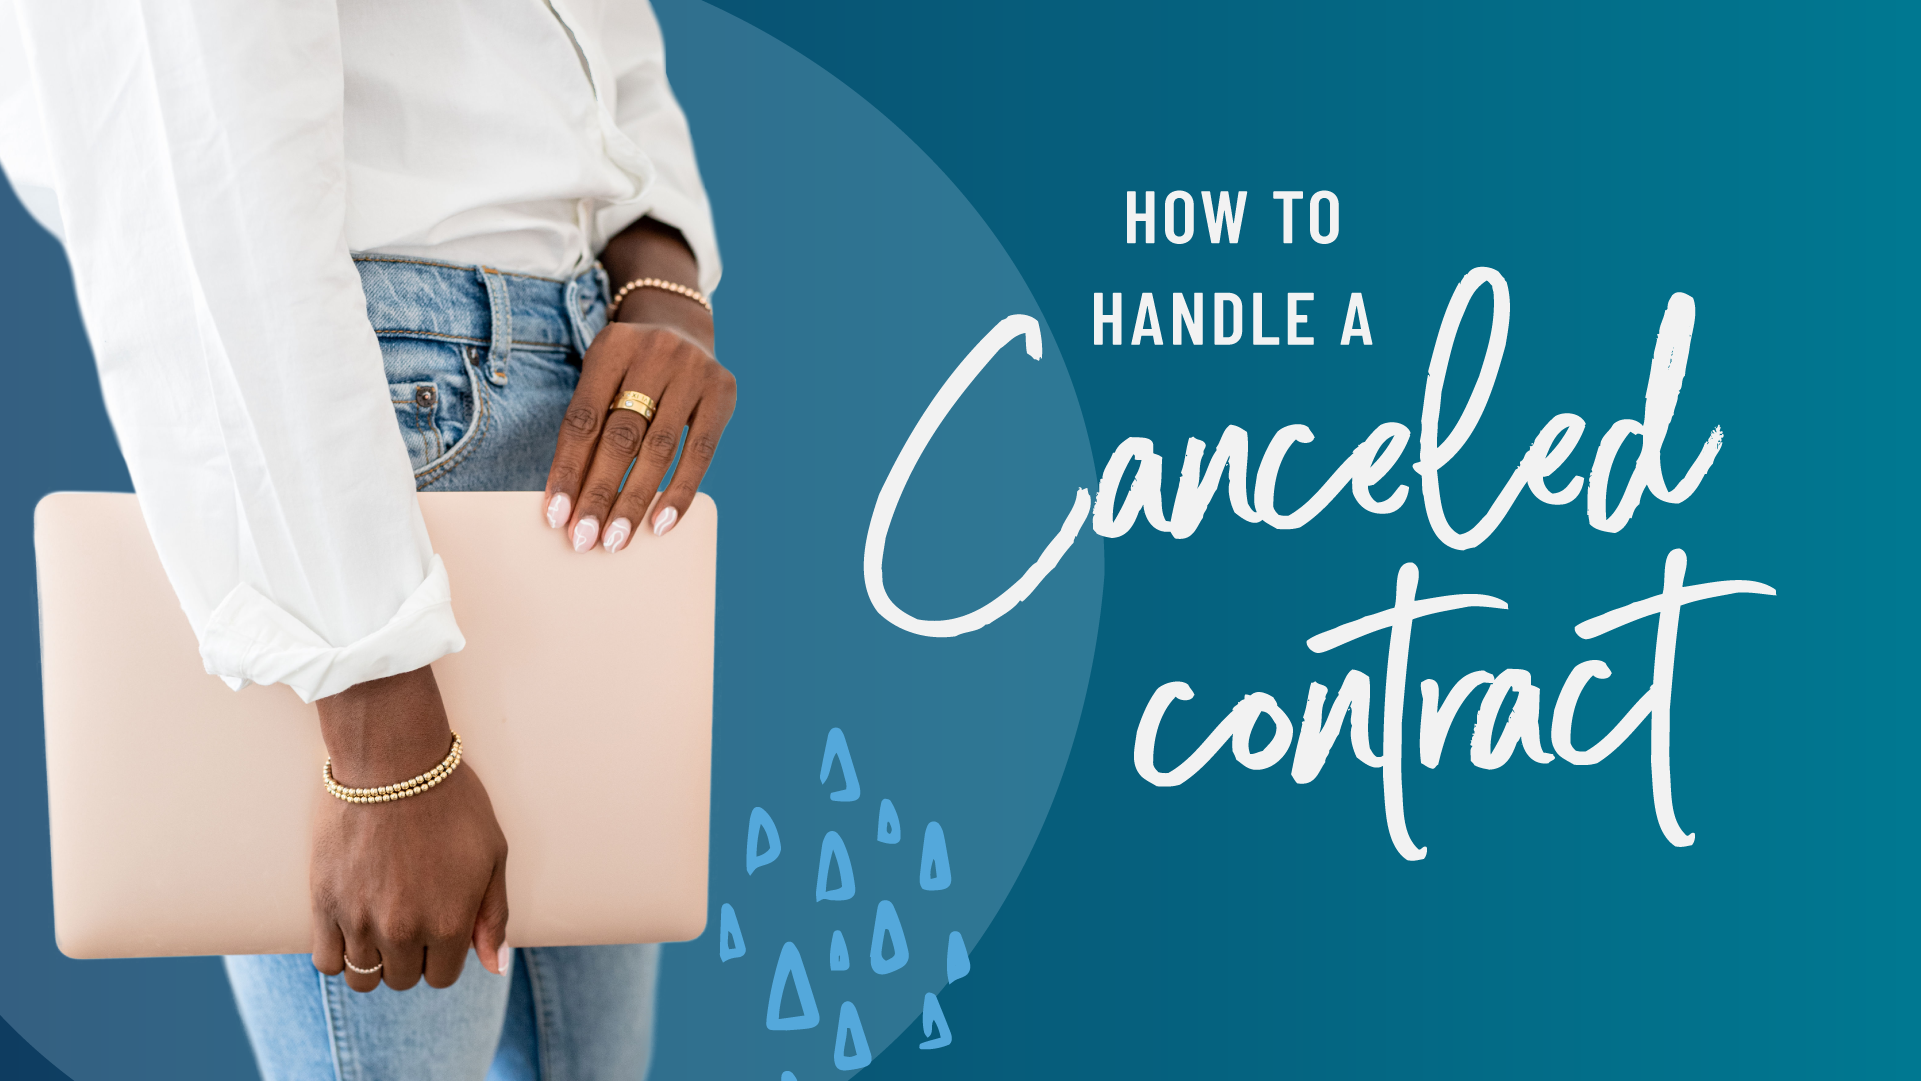 What Happens When a Client Wants to Cancel?